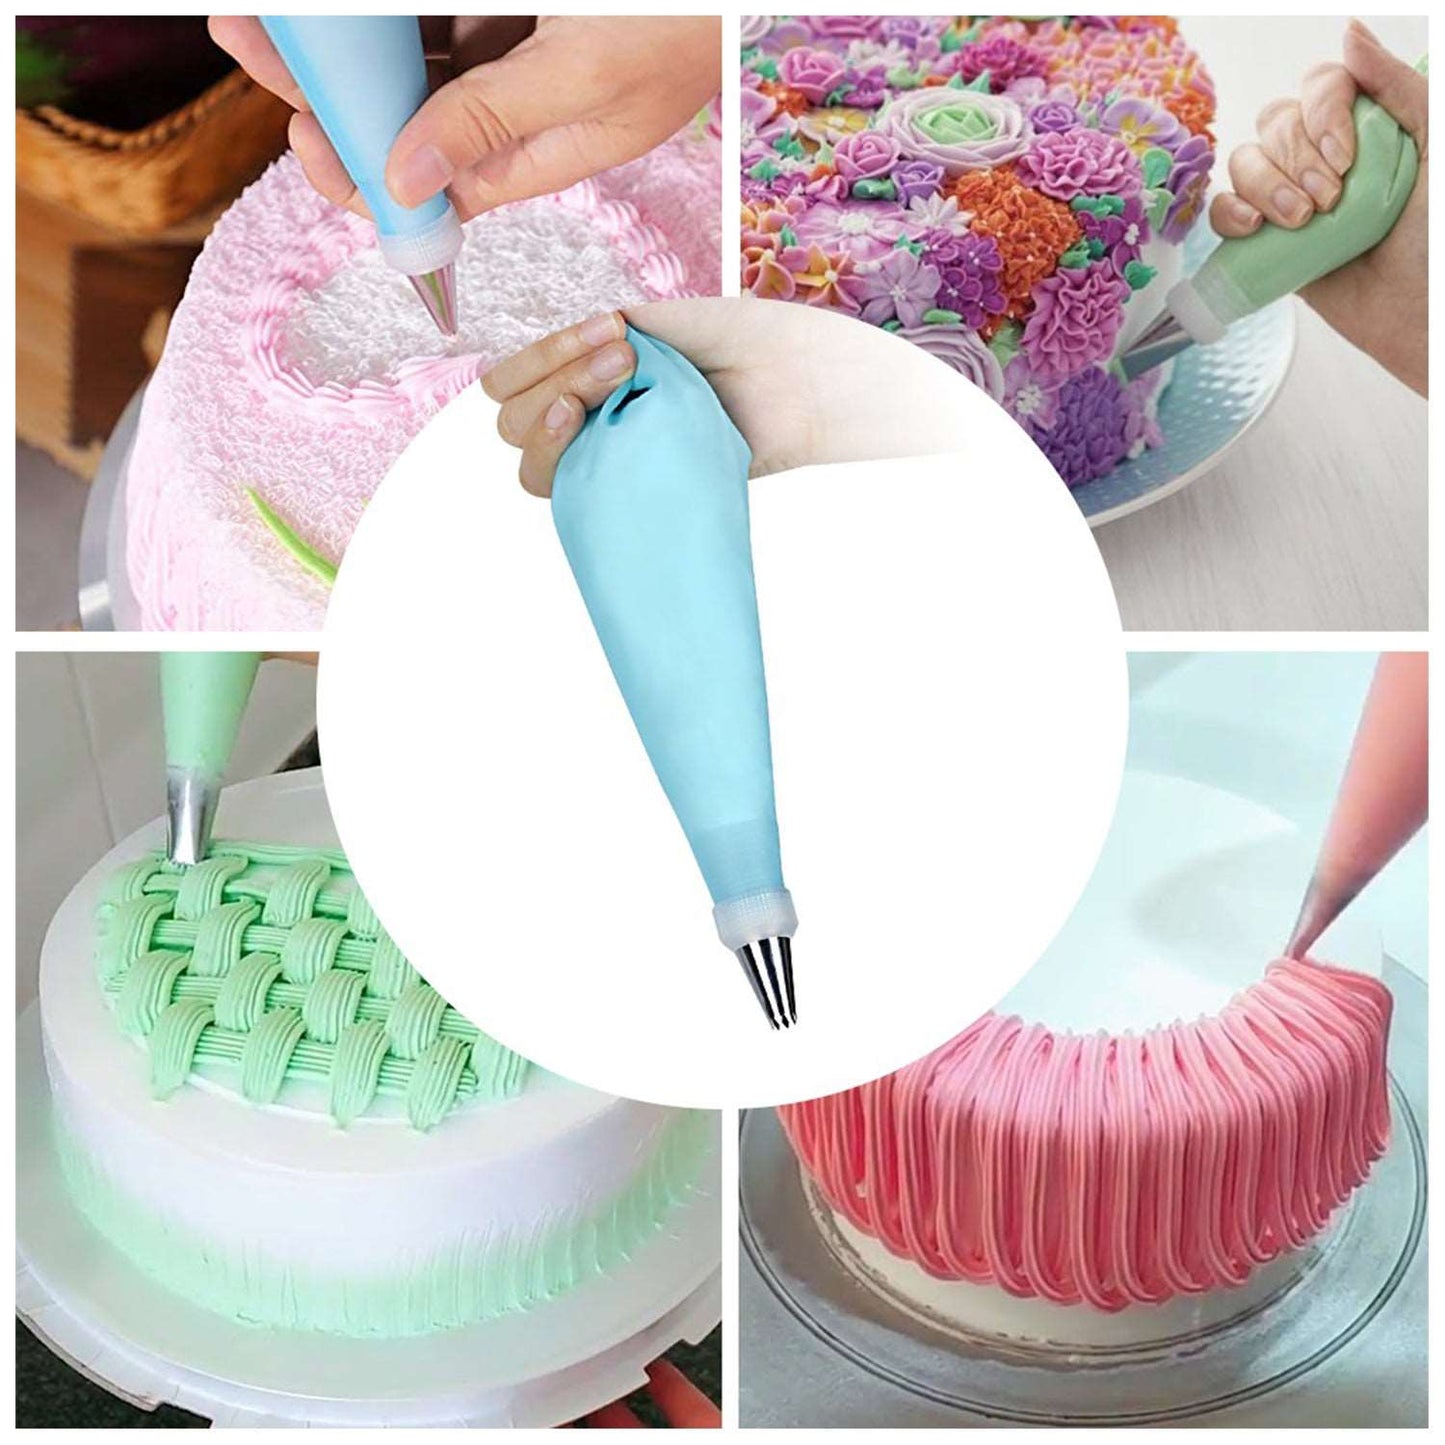 55 Pcs Cake Nozzle Set and Nozzle Tool for Making Cake and Pastry Decorations